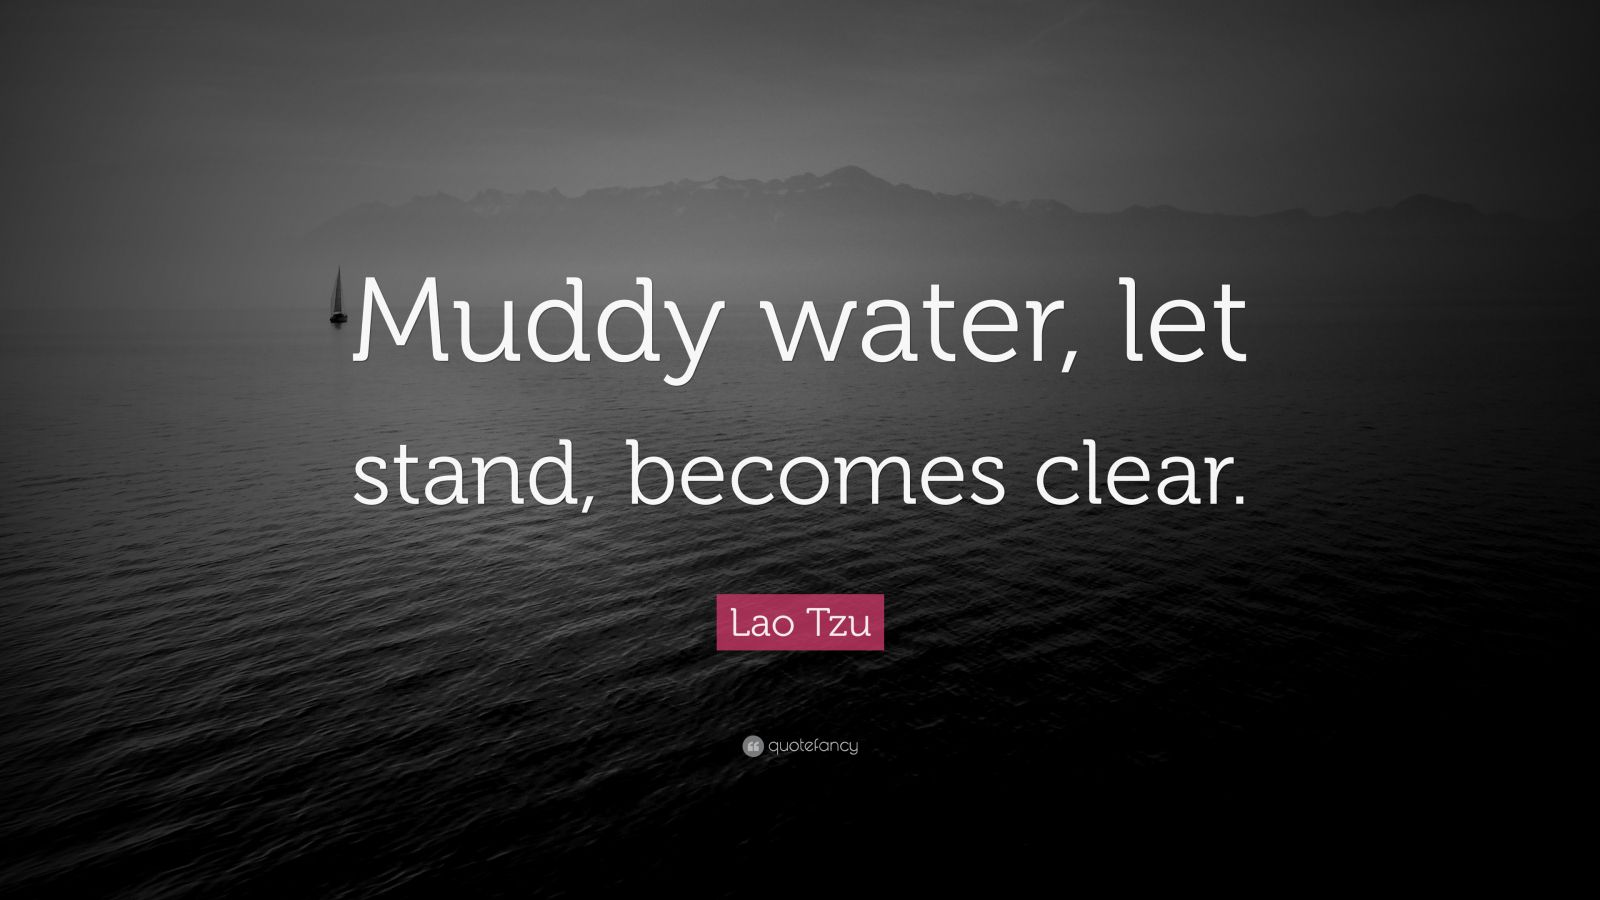 Lao Tzu Quote: "Muddy water, let stand, becomes clear." (12 wallpapers) - Quotefancy